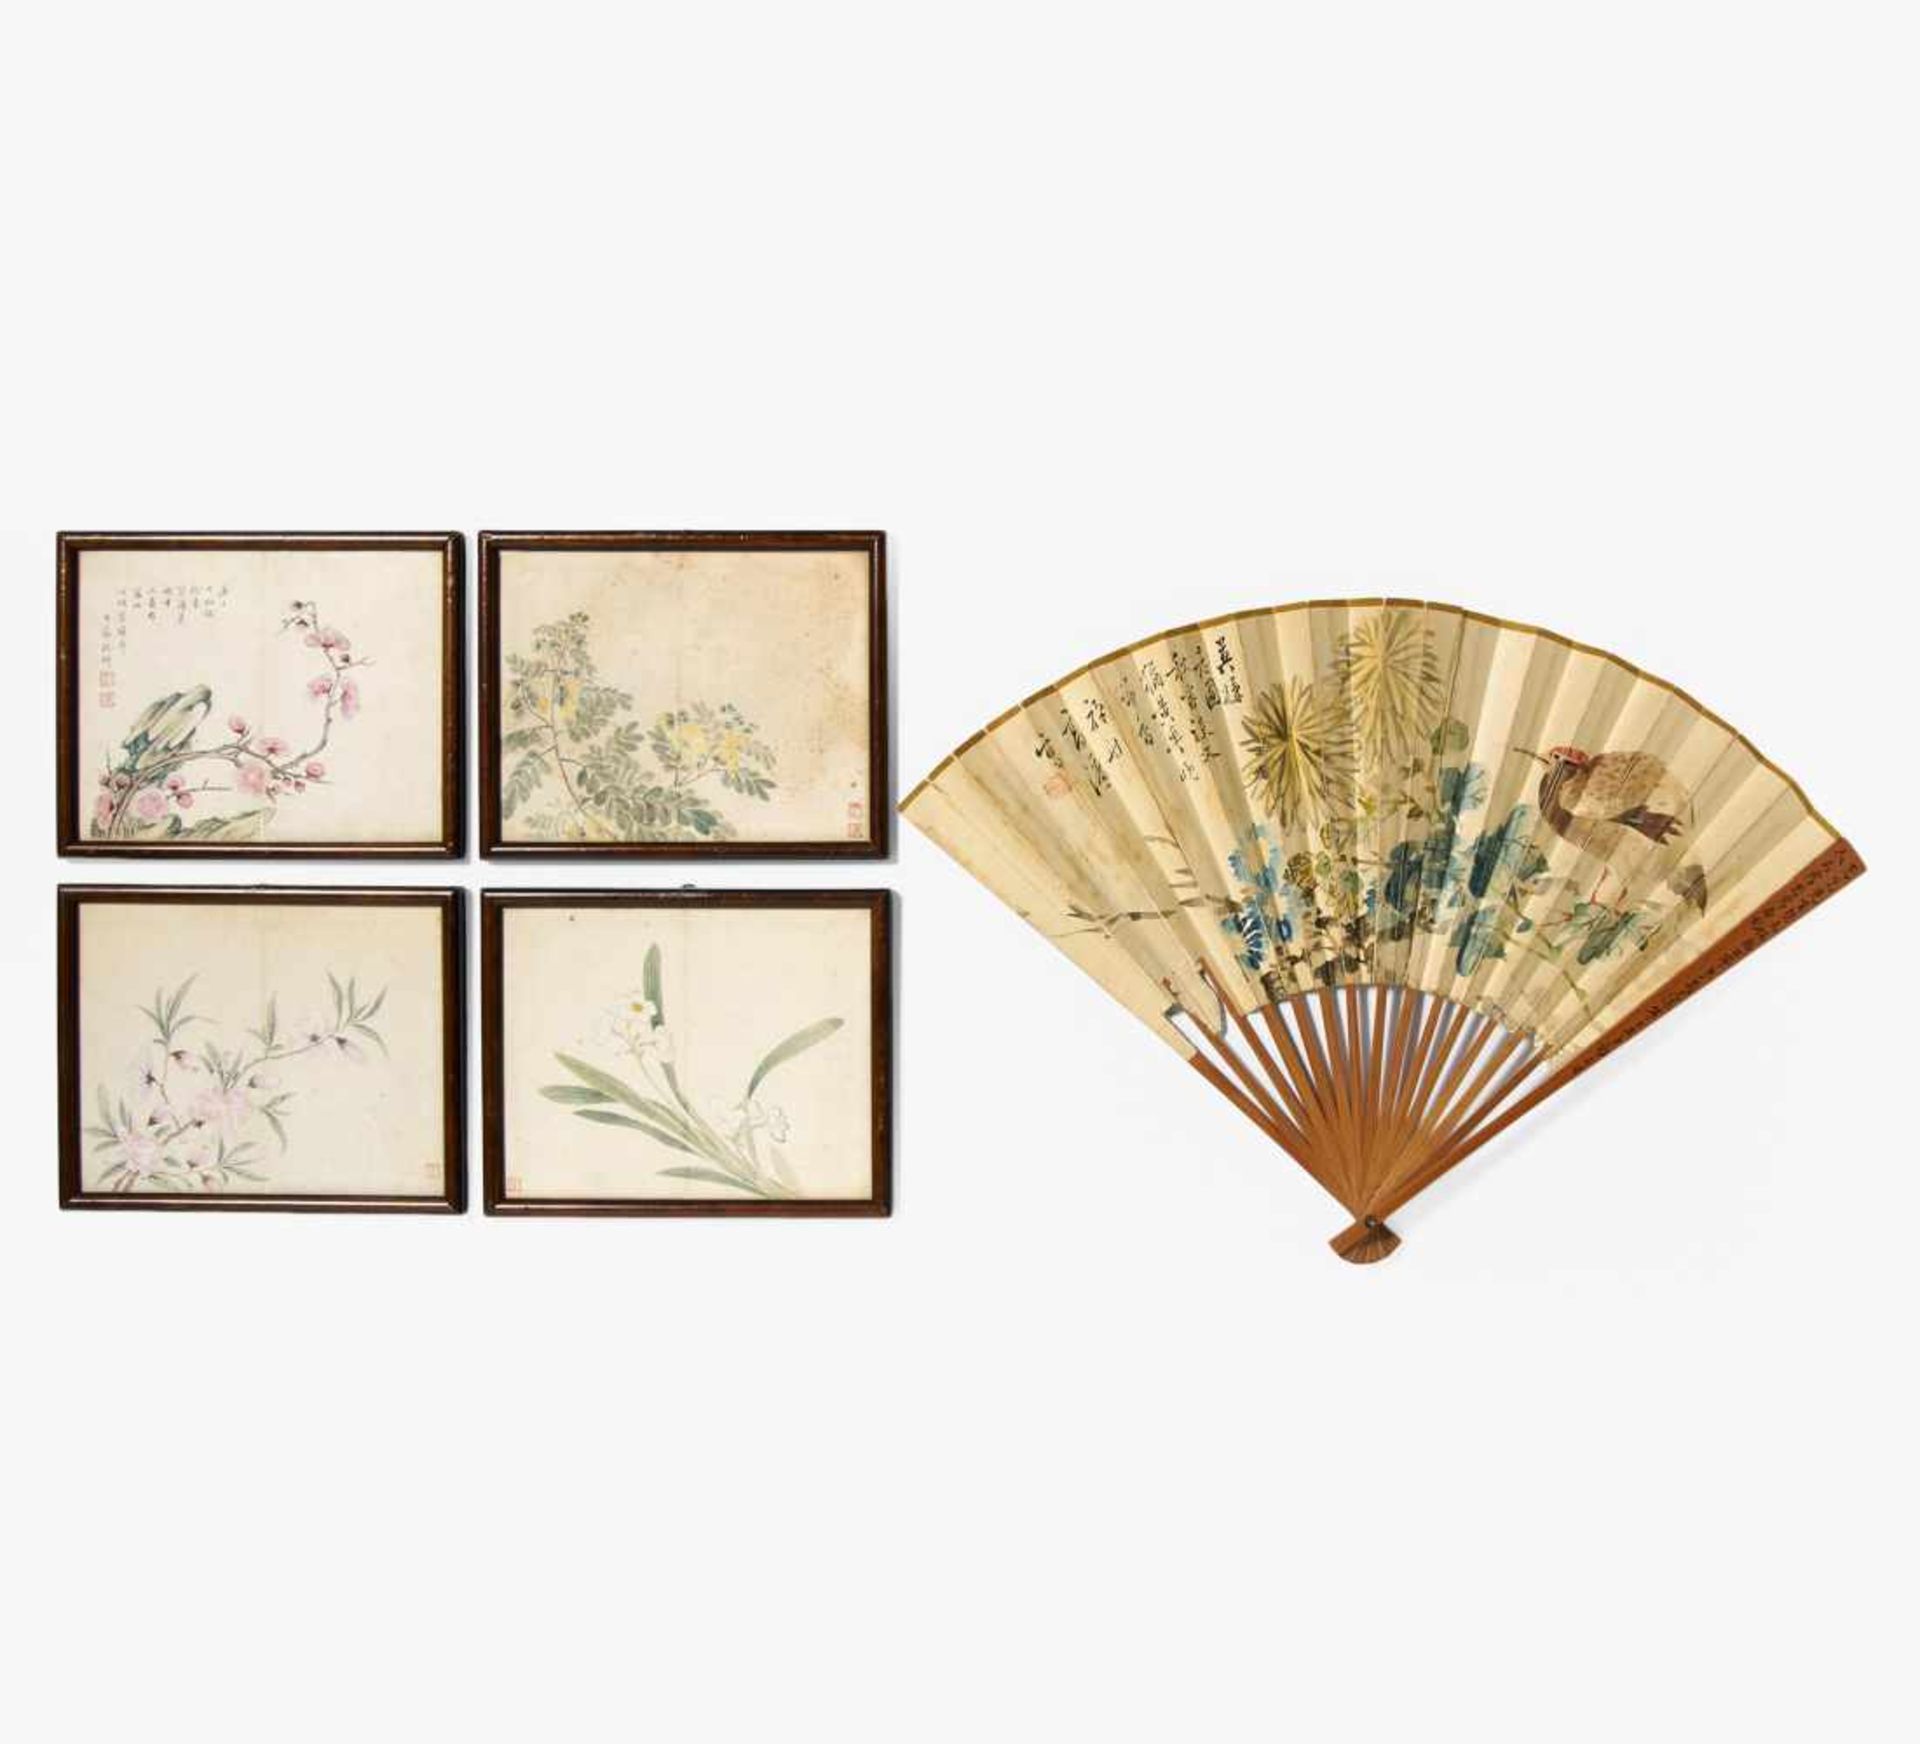 FAN AND FOUR MINIATURE PAINTINGS. China. Qing dynasty. 19th c. Ink and color on paper. a) Fan: Front